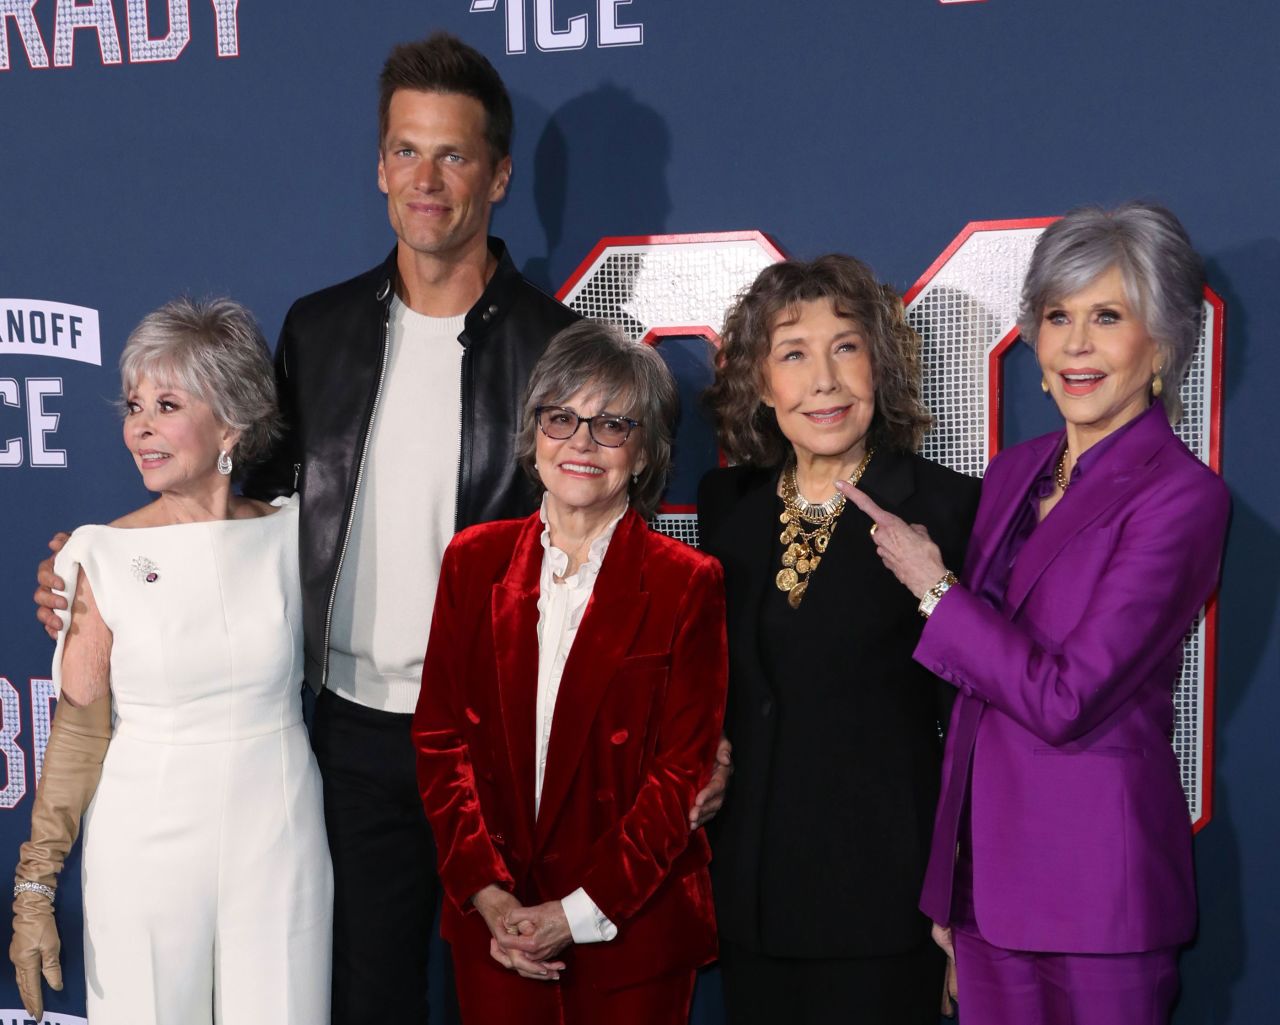 Field and her "80 for Brady" co-stars attend the film's premiere with NFL legend Tom Brady in January 2023. From left are Rita Moreno, Brady, Field, Lily Tomlin and Fonda.